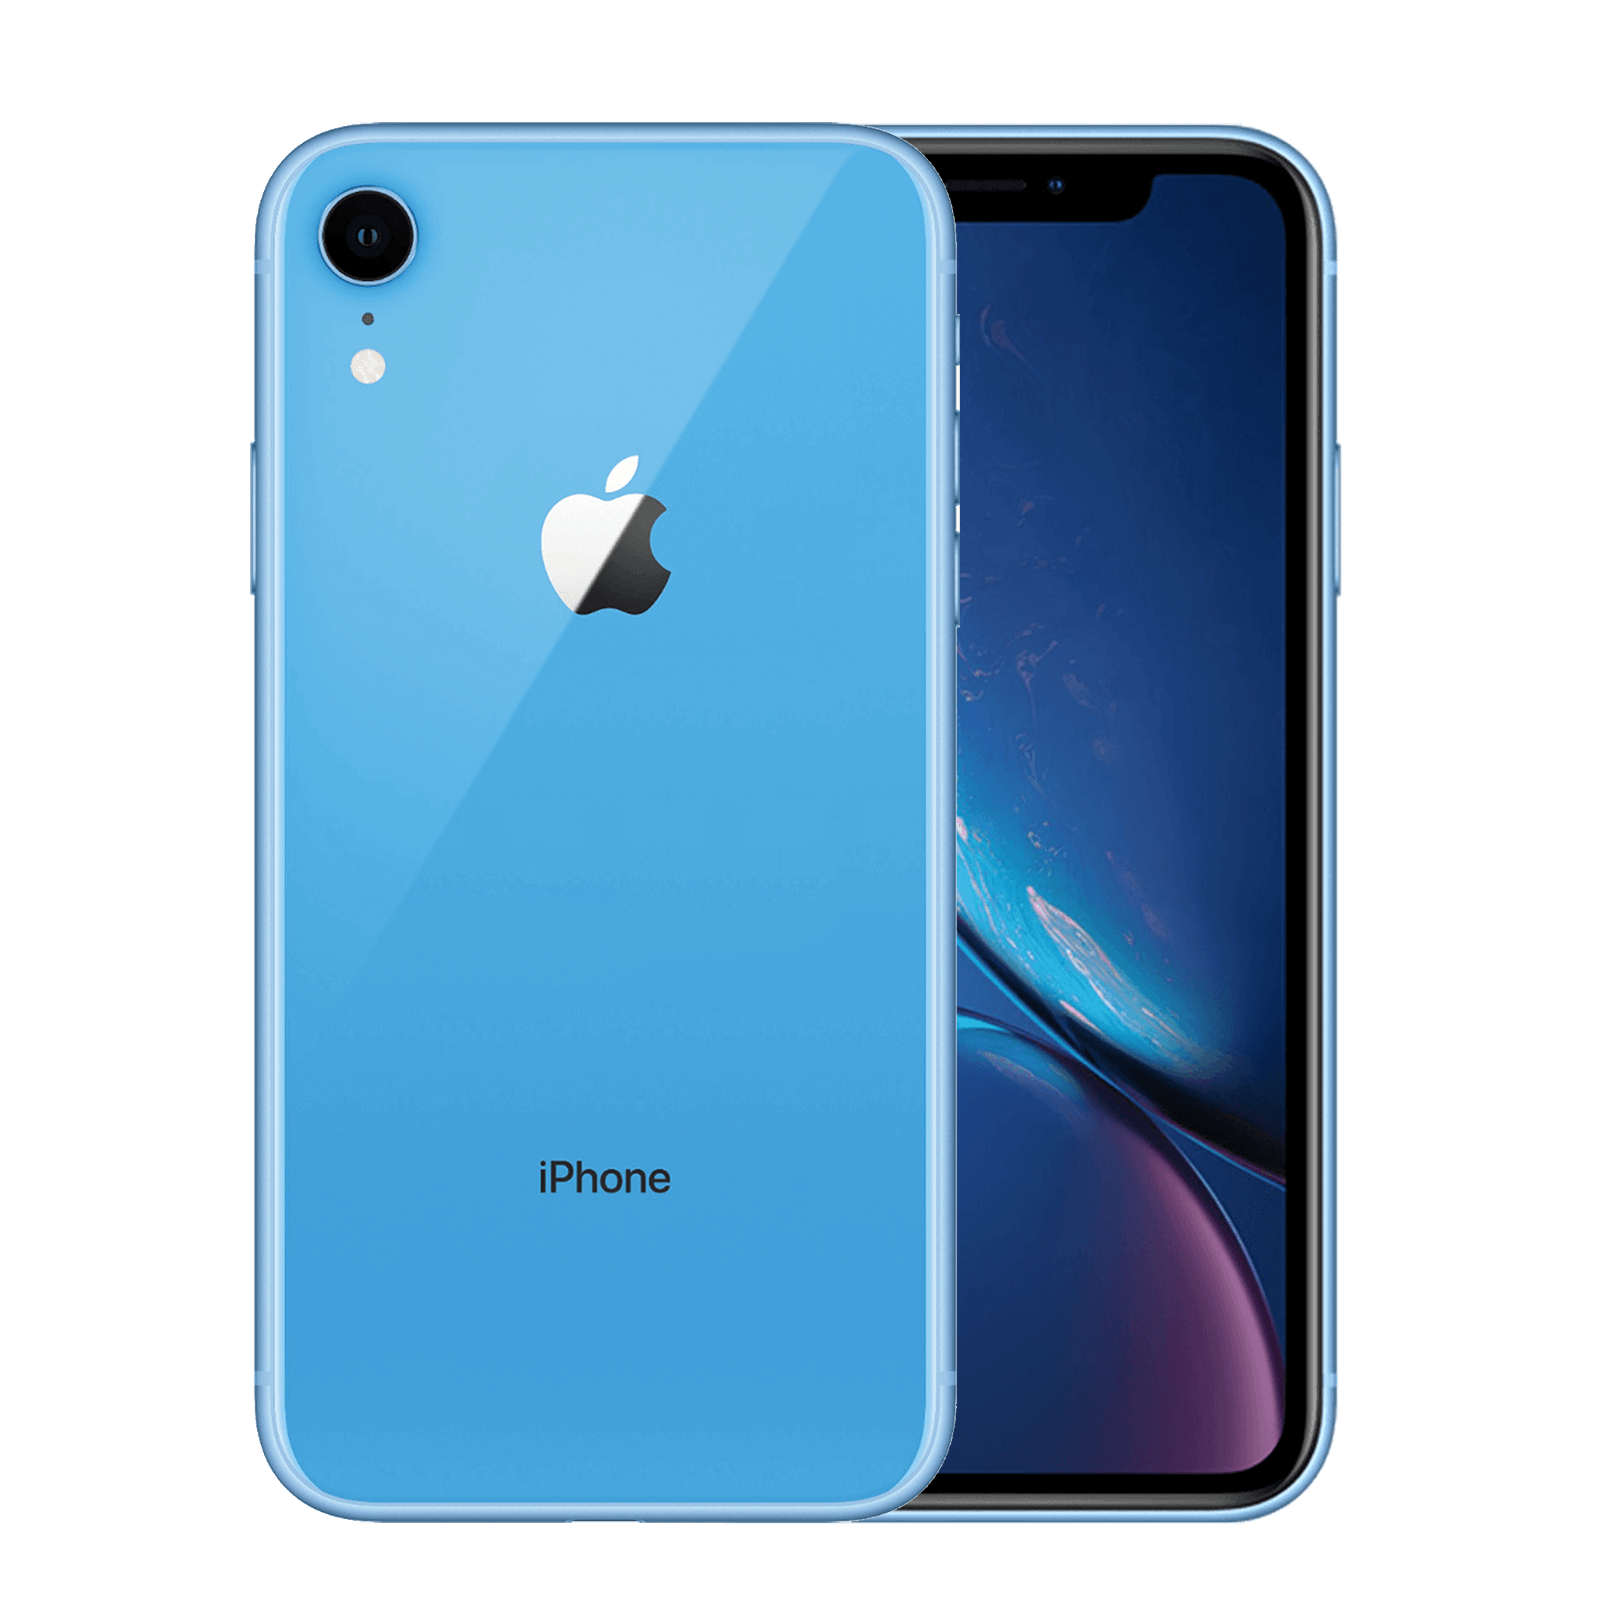 Apple iPhone XR 128GB Blue Very Good - AT&T